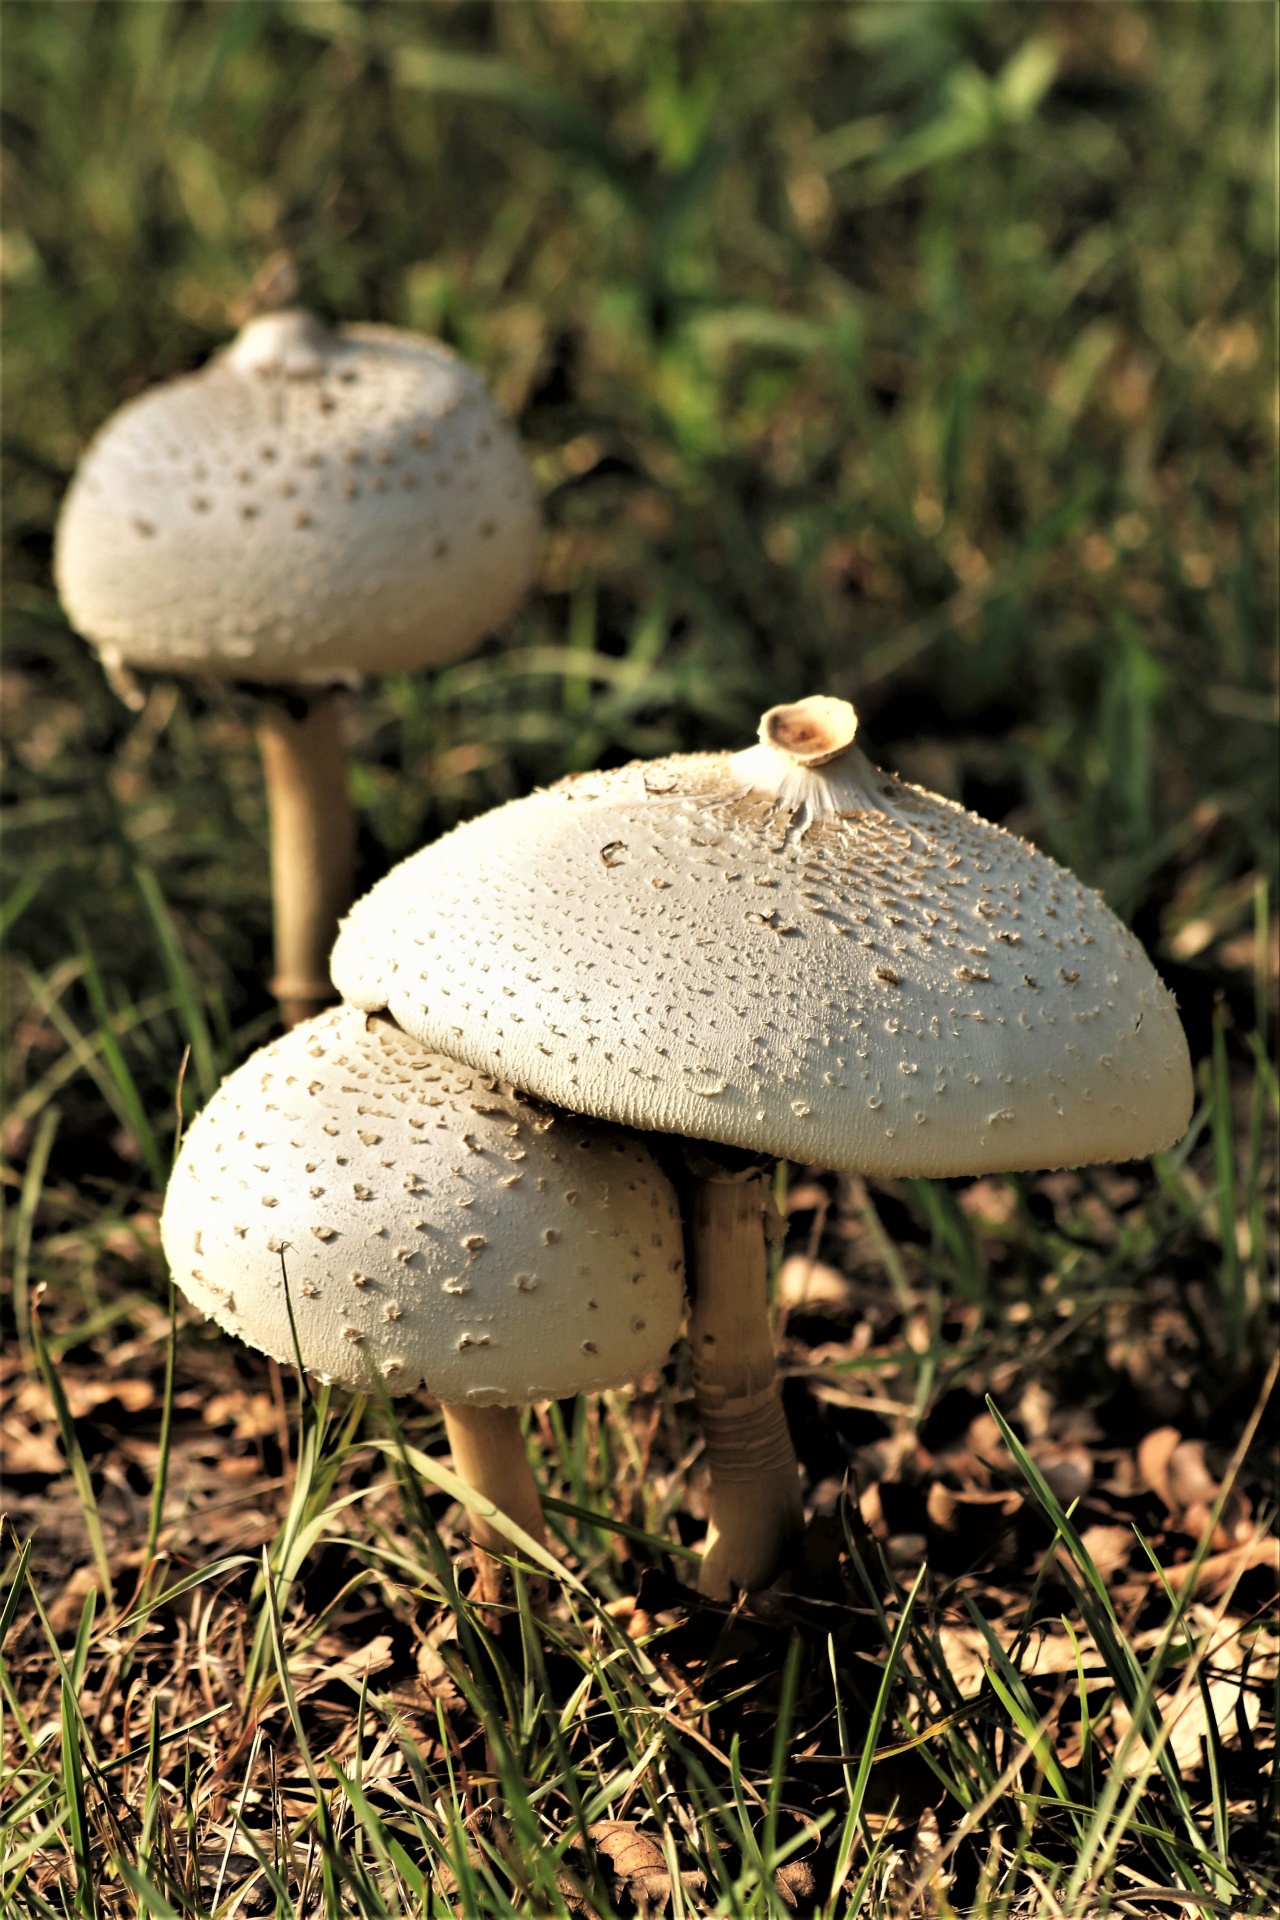 Close-up of two white Amanita mushrooms and one blurred in the background, growing among fall leaves and grass.